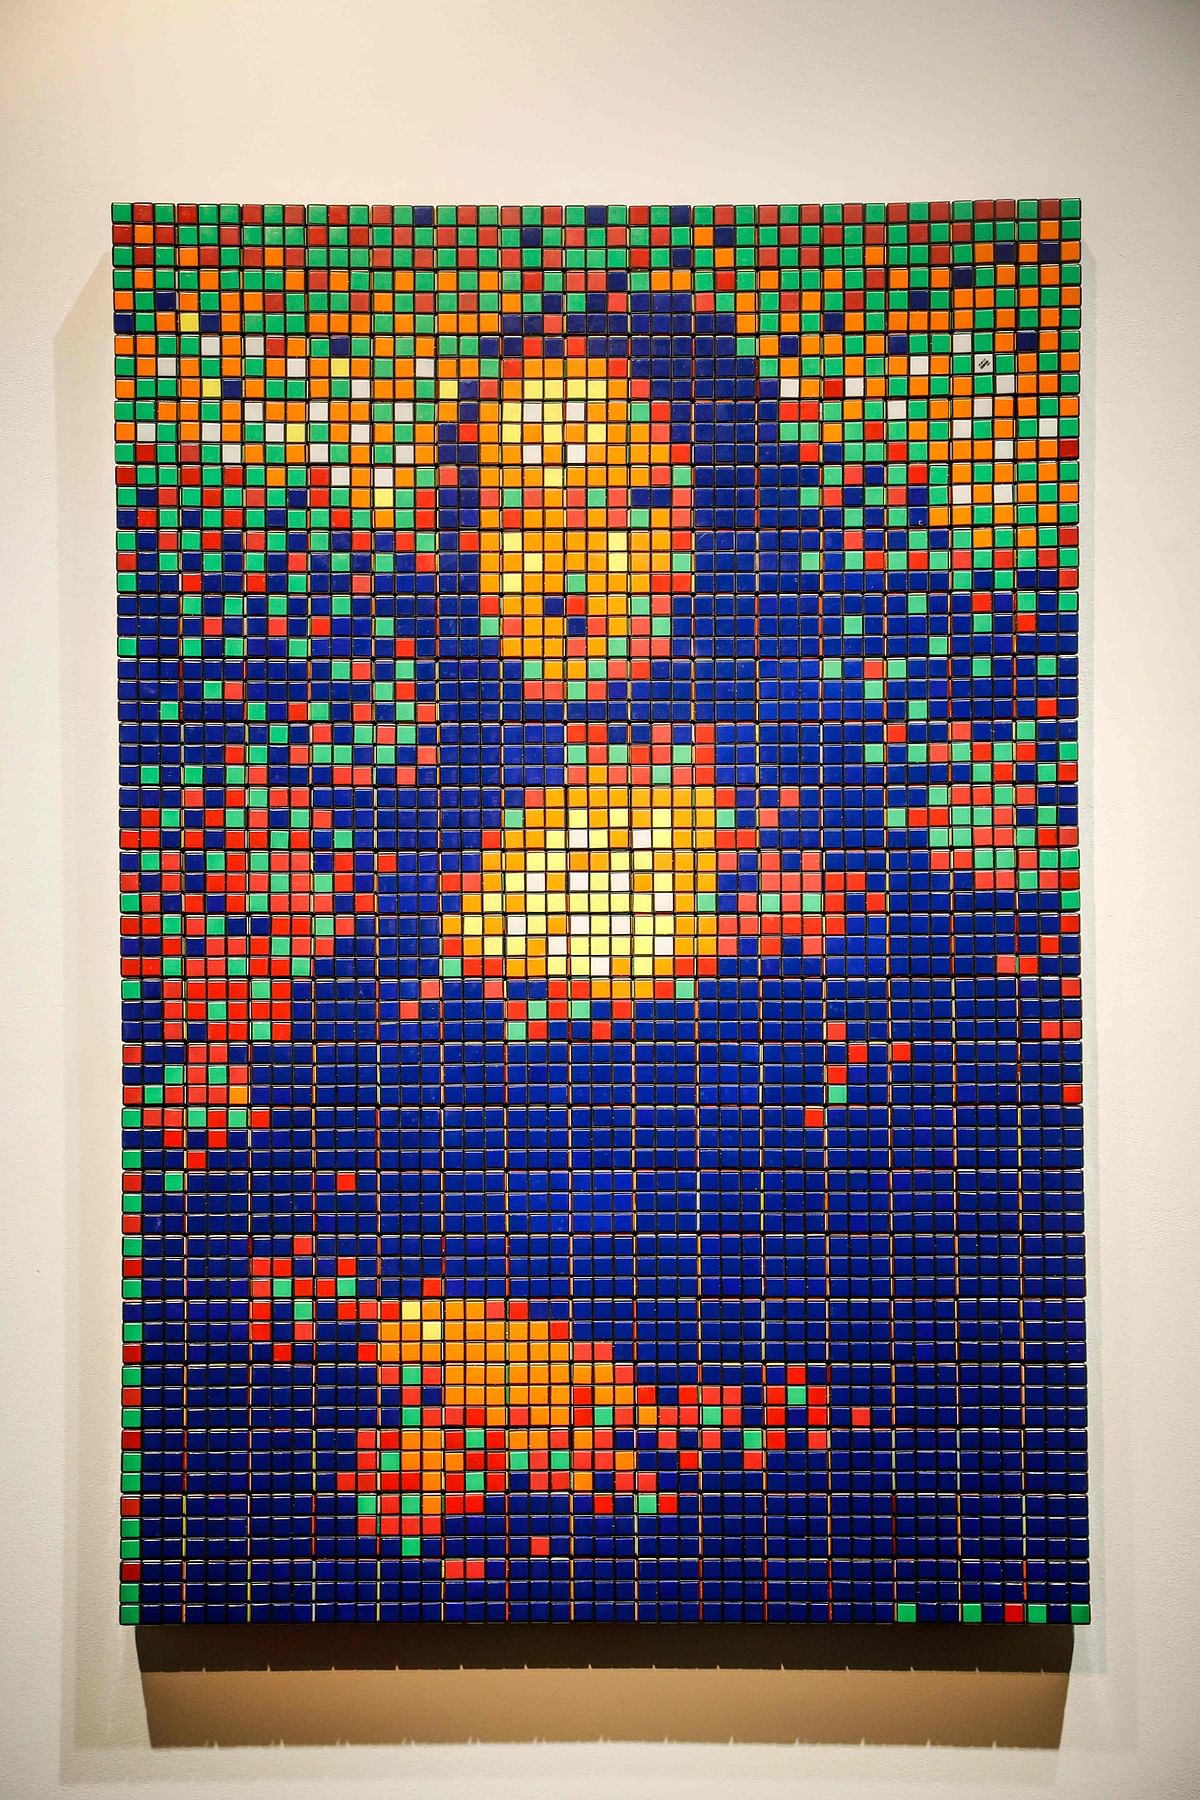 An auction with a twist: Mona Lisa made of Rubik's Cubes goes on sale in Paris